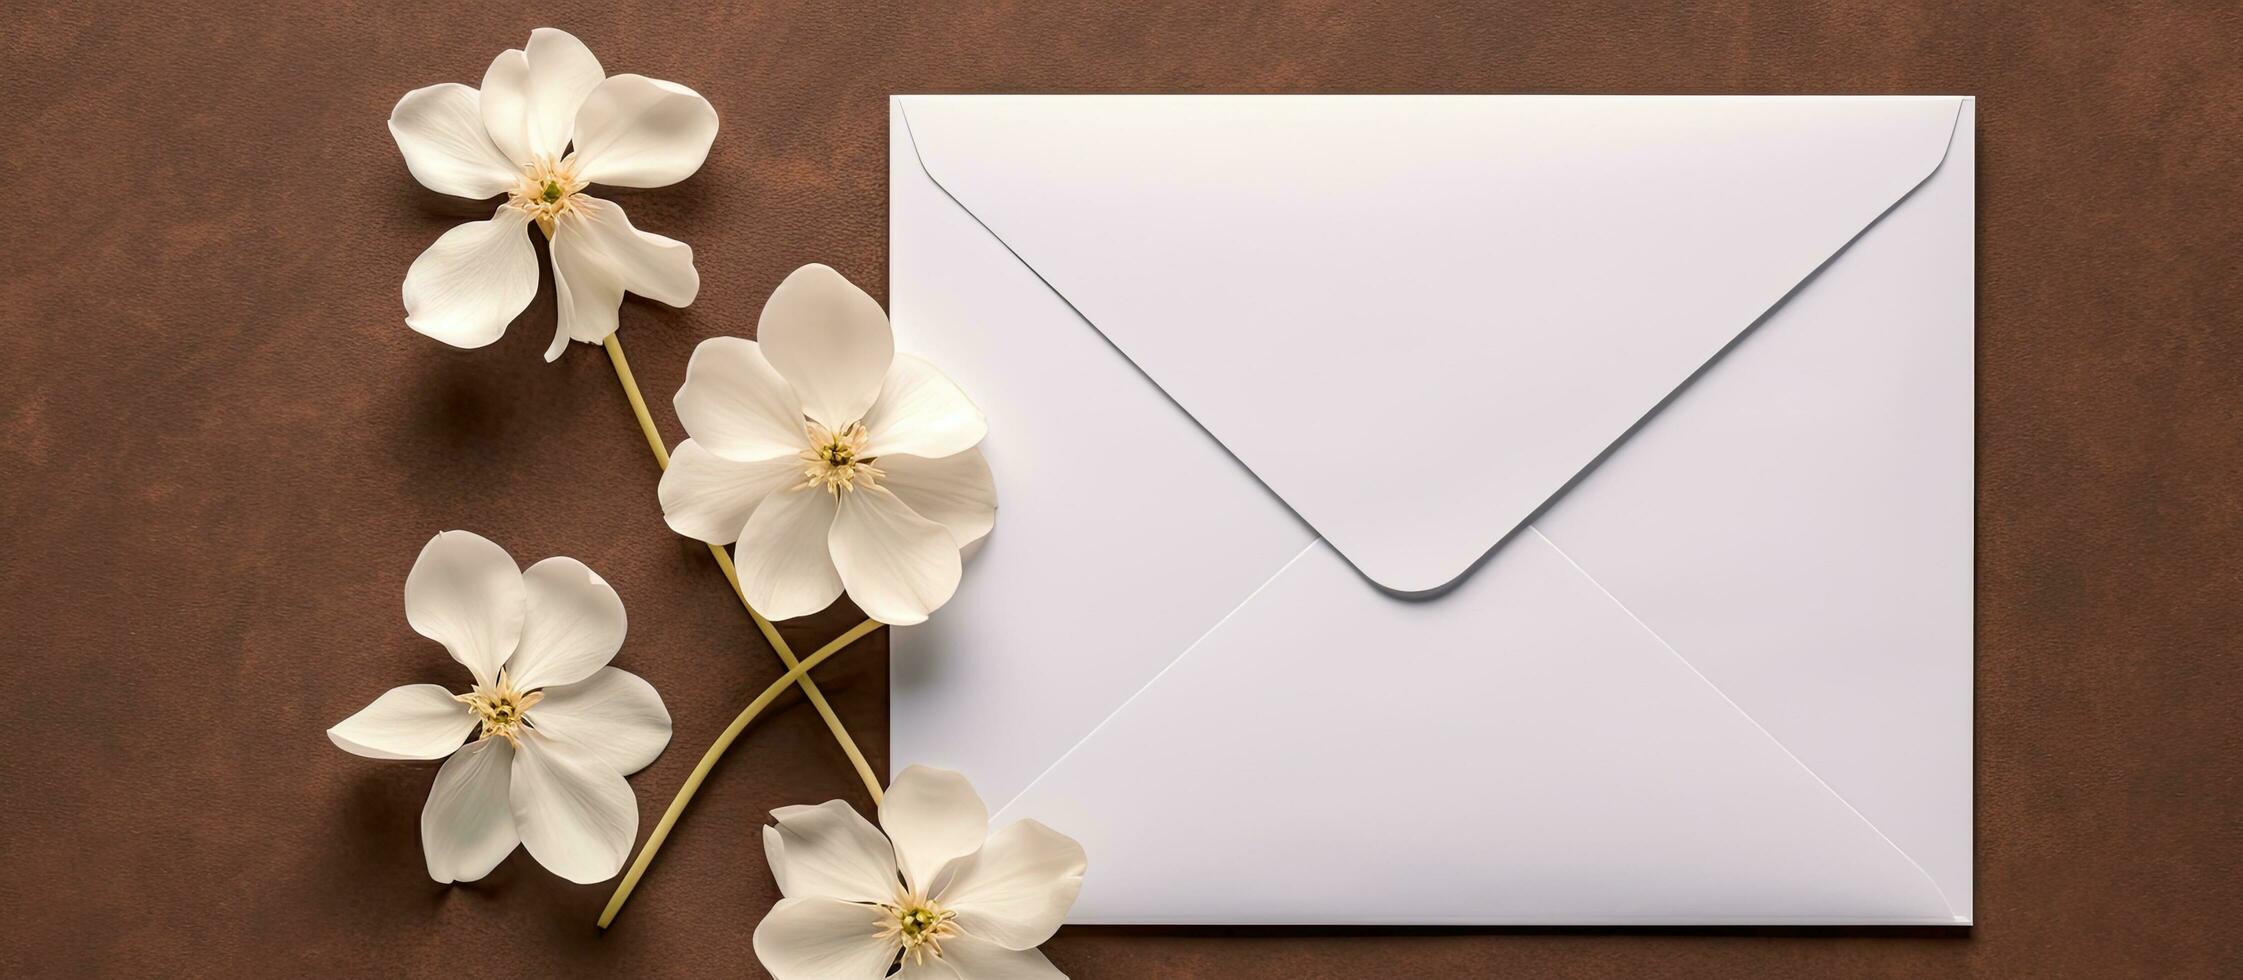 Top view mockup of a blank paper greeting card with an envelope and white flowers, along with photo